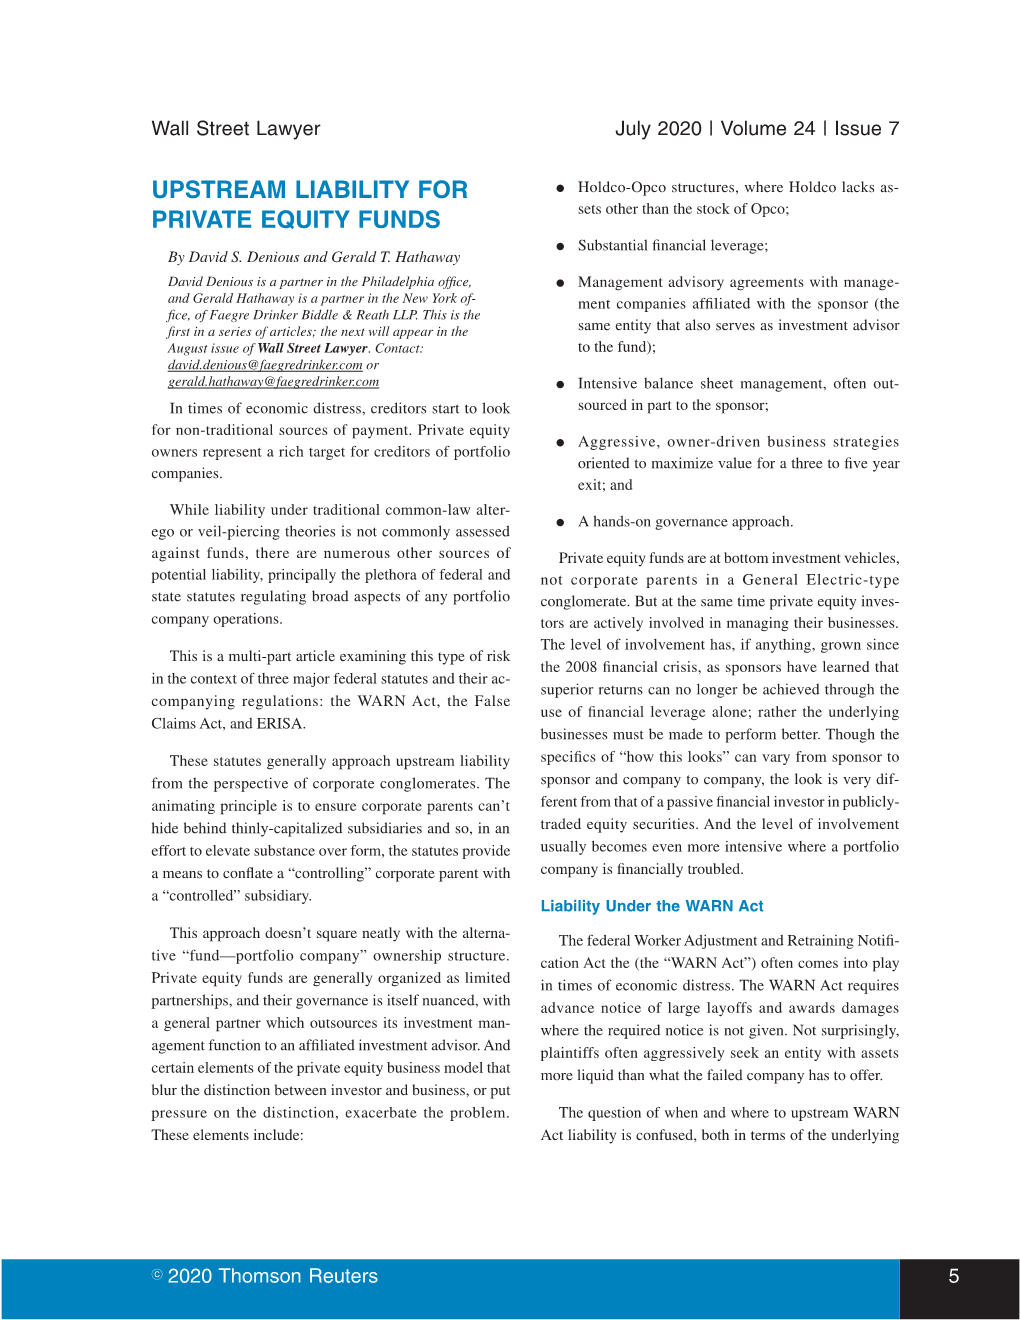 Upstream Liability for Private Equity Funds